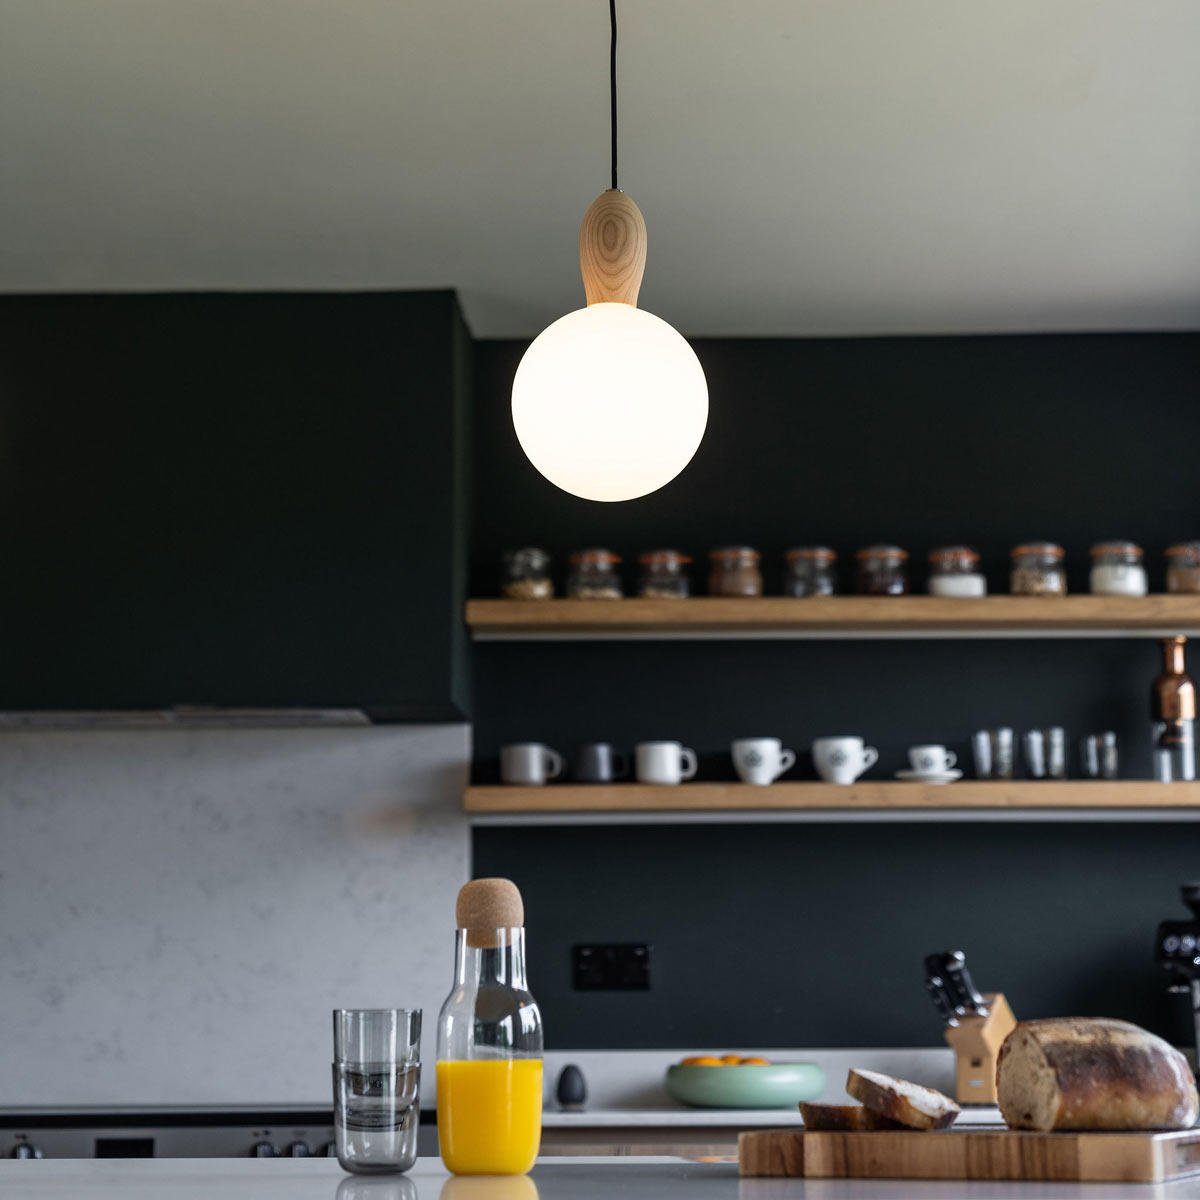 The elegant clean lines of the Woody pendant light, supplied by South Charlotte Fine Lighting, means it can make an elegant modern statement in almost any room in your home